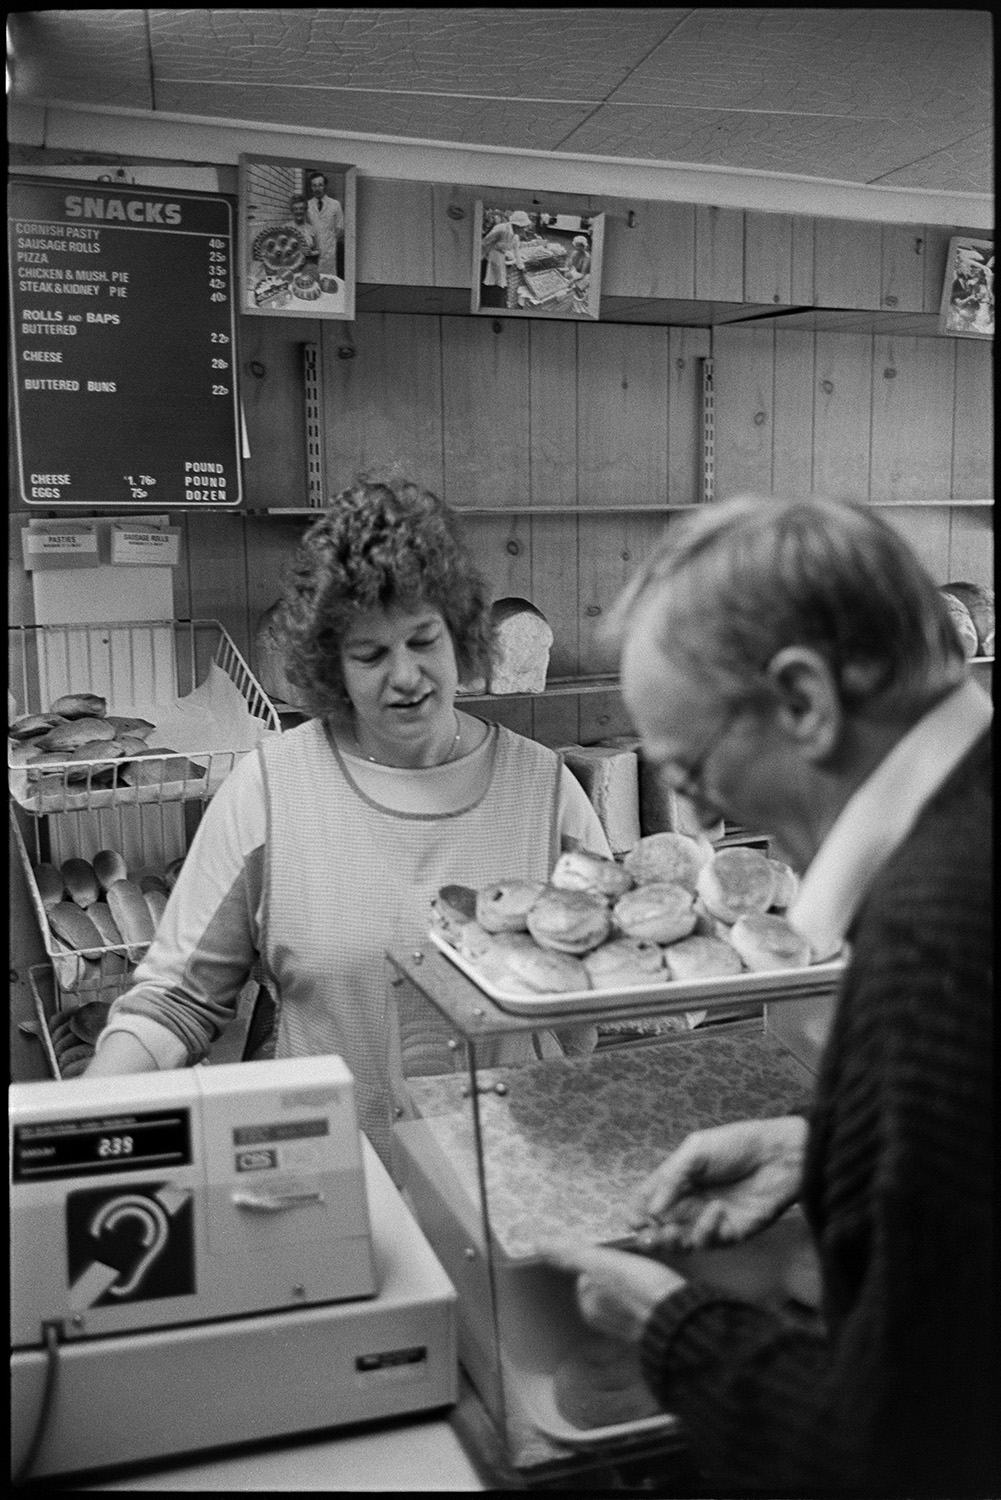 Bakery interior, making bread and serving customers in shop.
[Woman serving a customer in The Bakery shop at East Street, Chulmleigh. There is a tray of buns, shelving with bread and rolls, a till, and a price list on display by the counter. The man in the foreground is counting out money.]